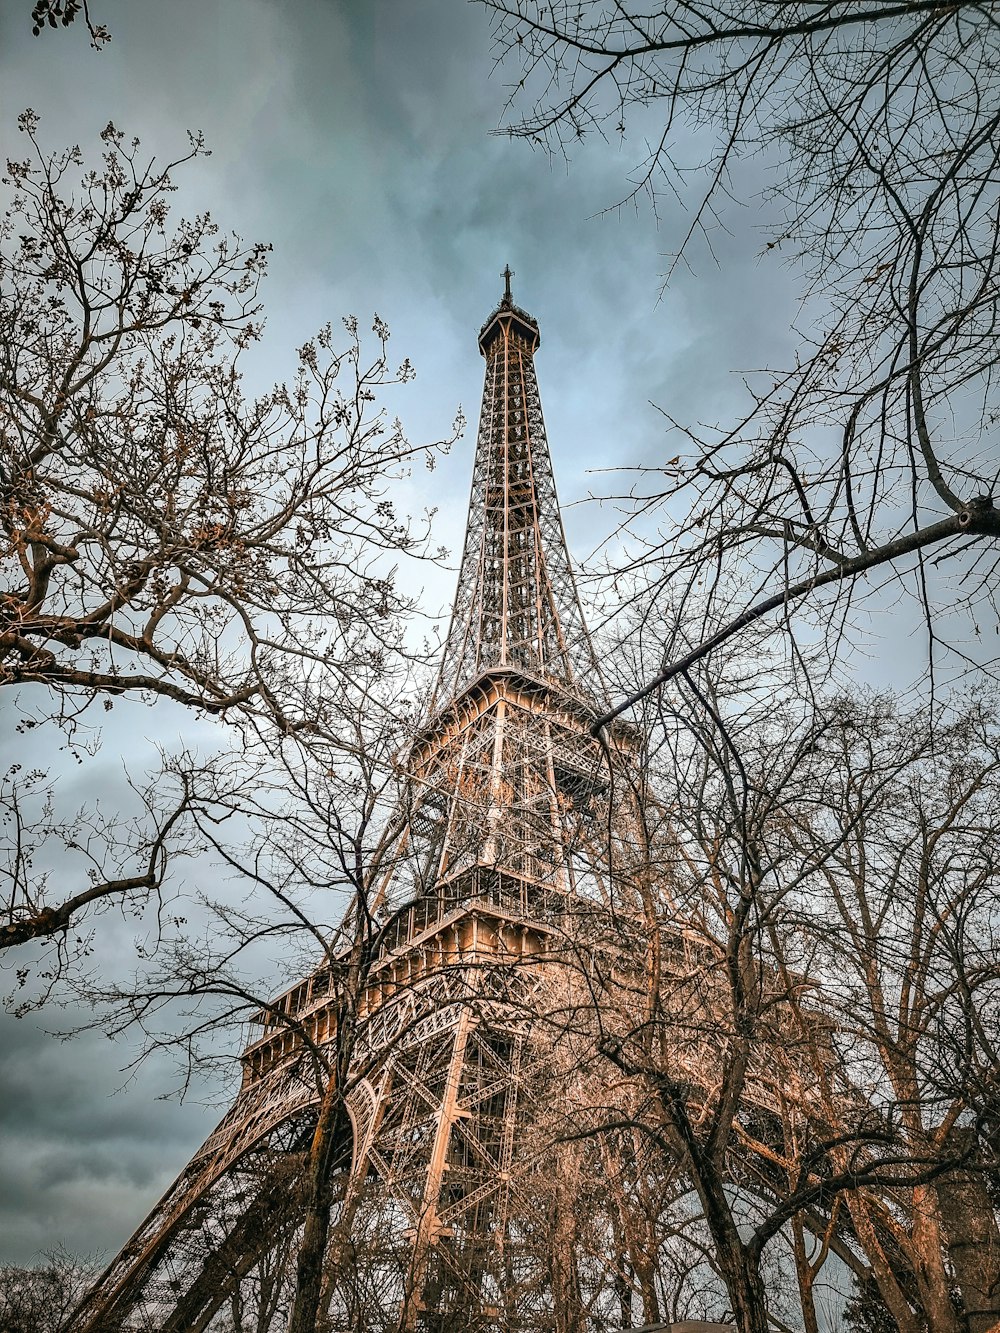 the eiffel tower is surrounded by bare trees